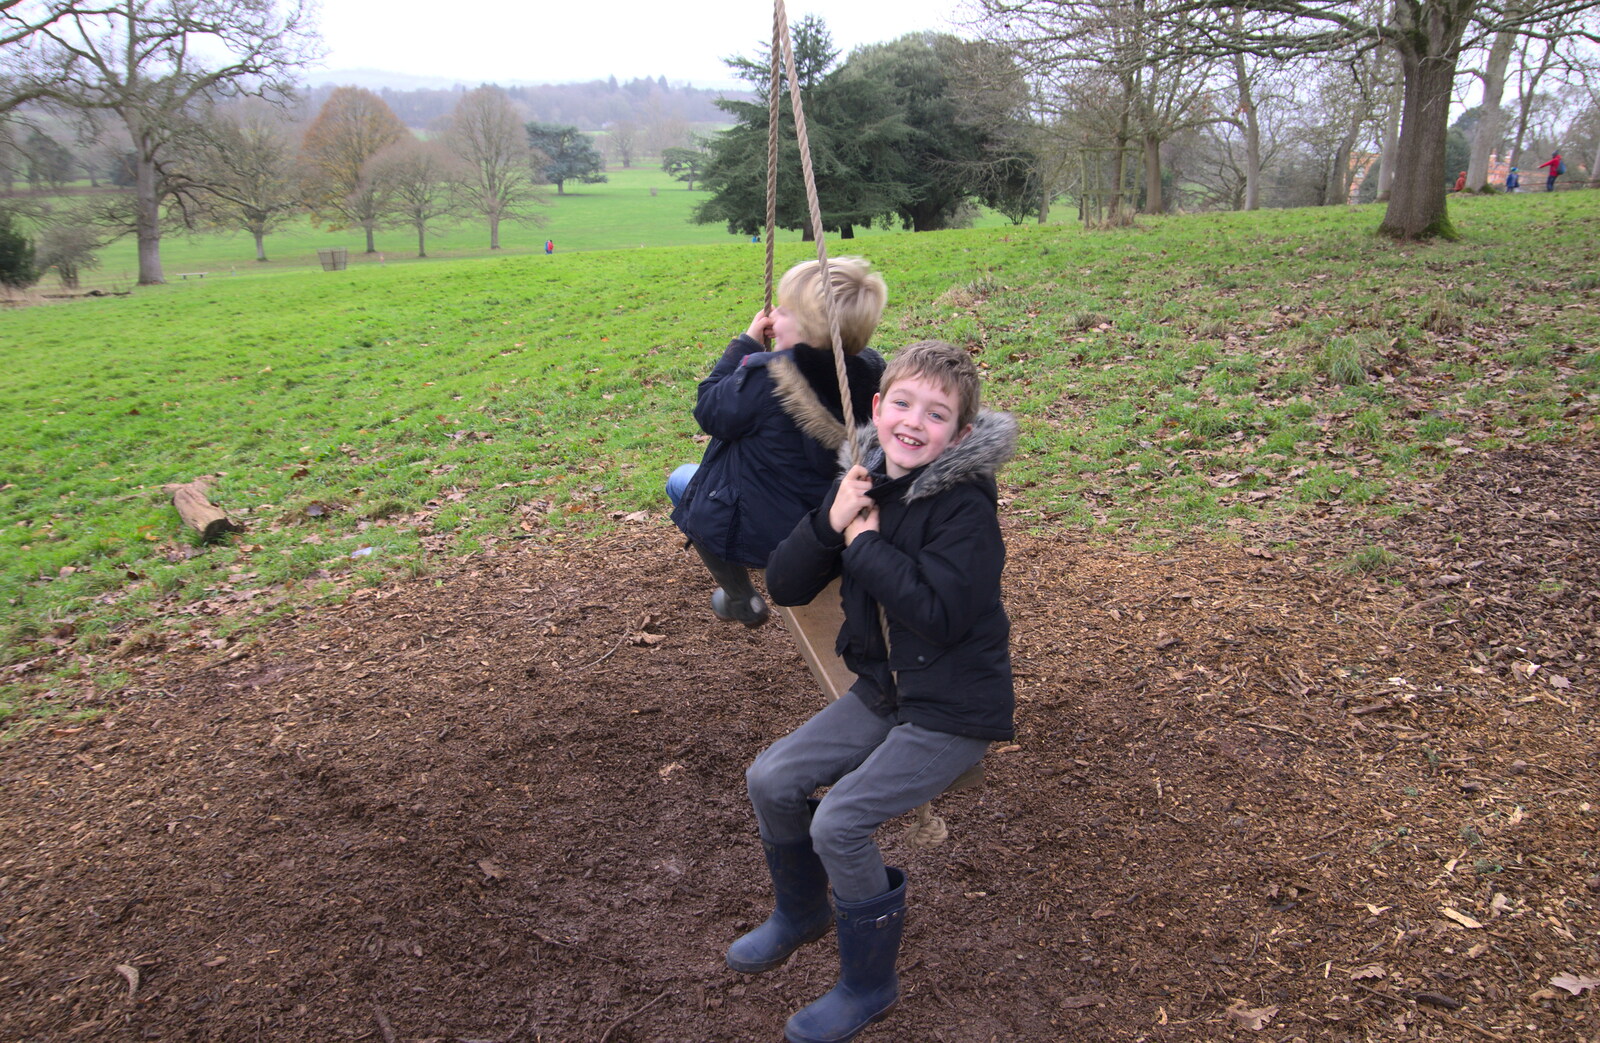 Fred on a swing from Killerton House, Broadclyst, Devon - 30th December 2017